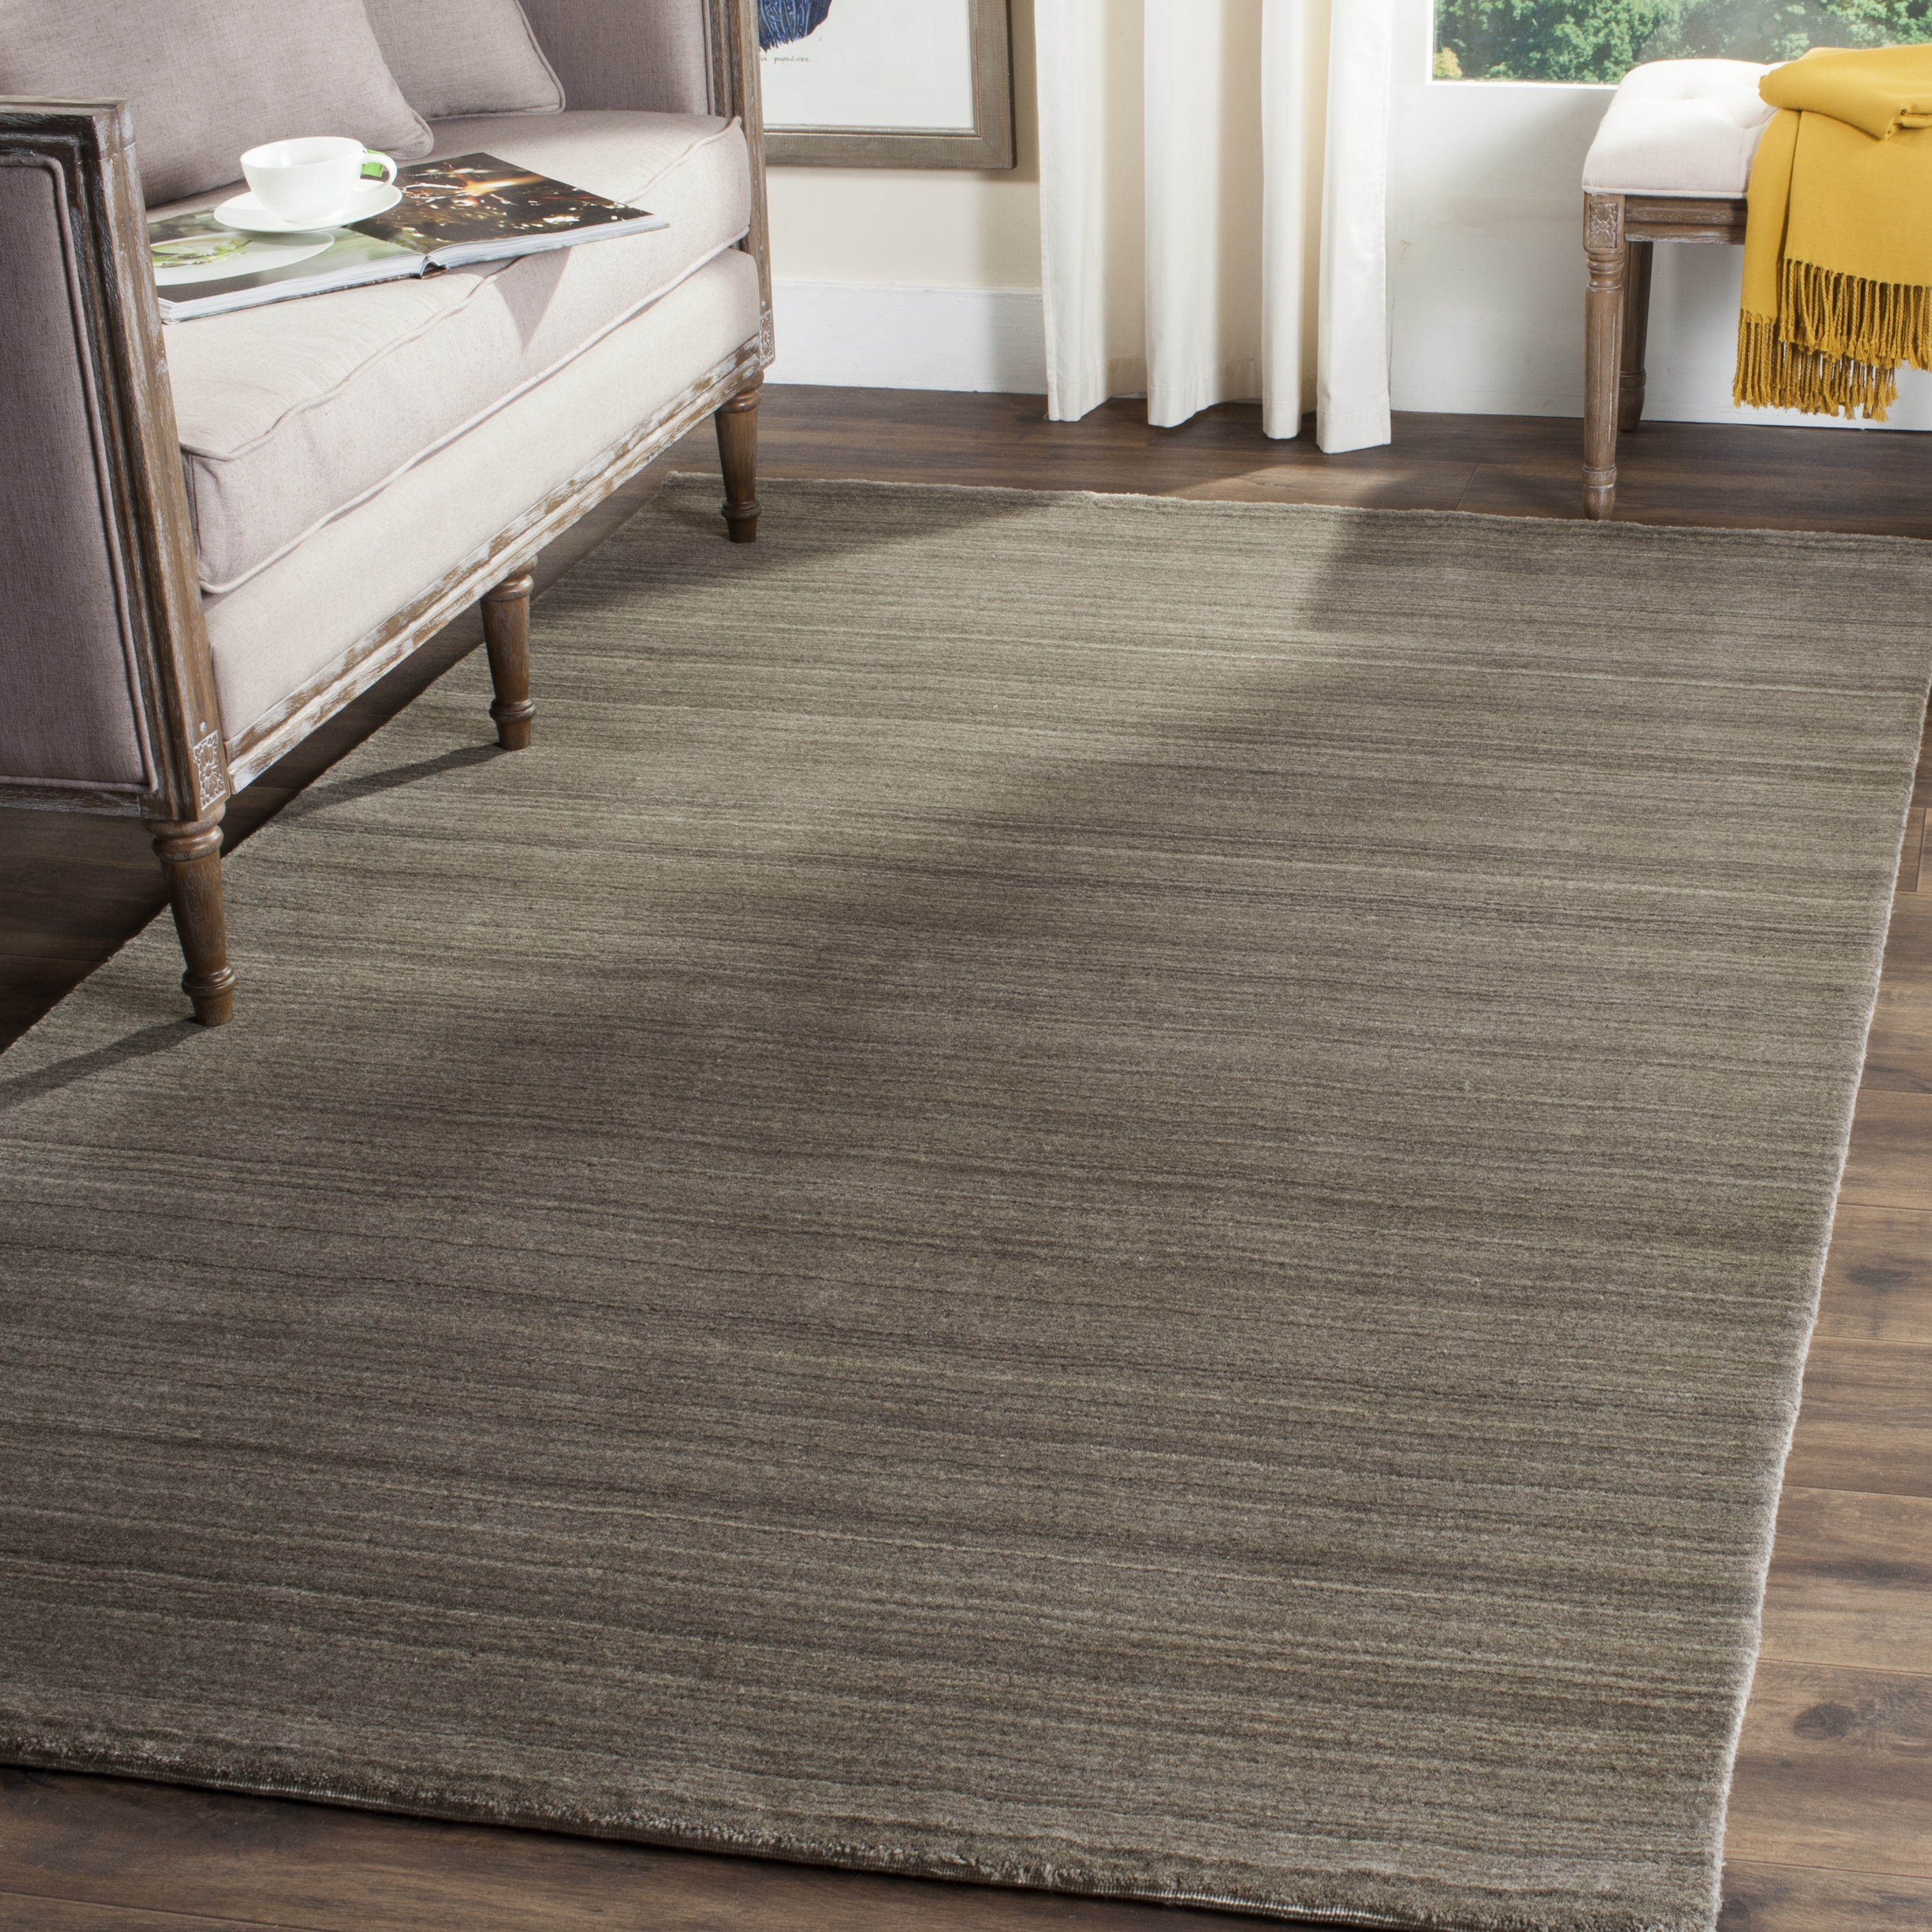 Arlo Home Hand Loomed Area Rug, HIM820E, Pewter,  6' X 9' - Image 1